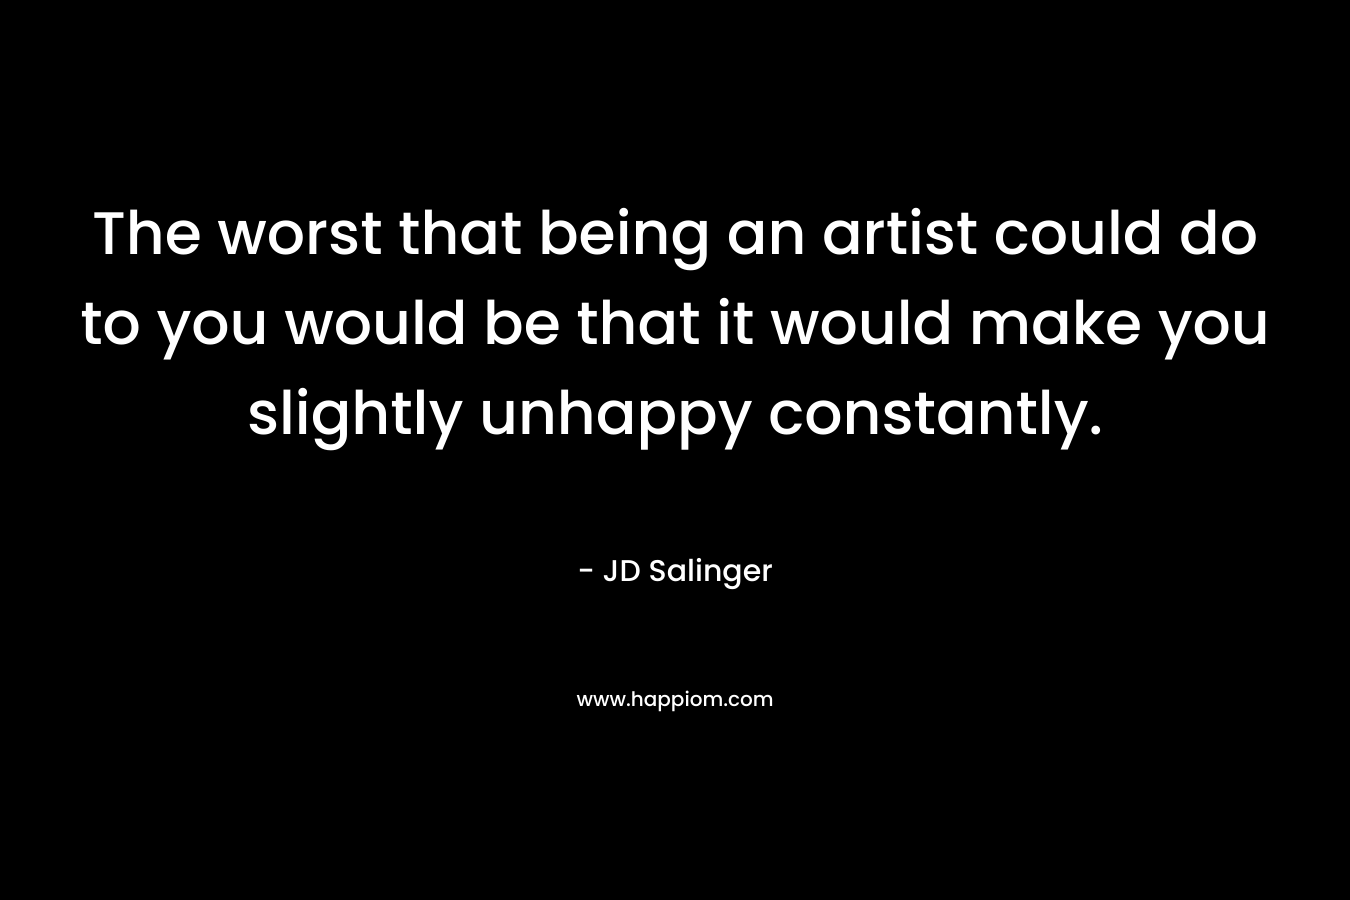 The worst that being an artist could do to you would be that it would make you slightly unhappy constantly.